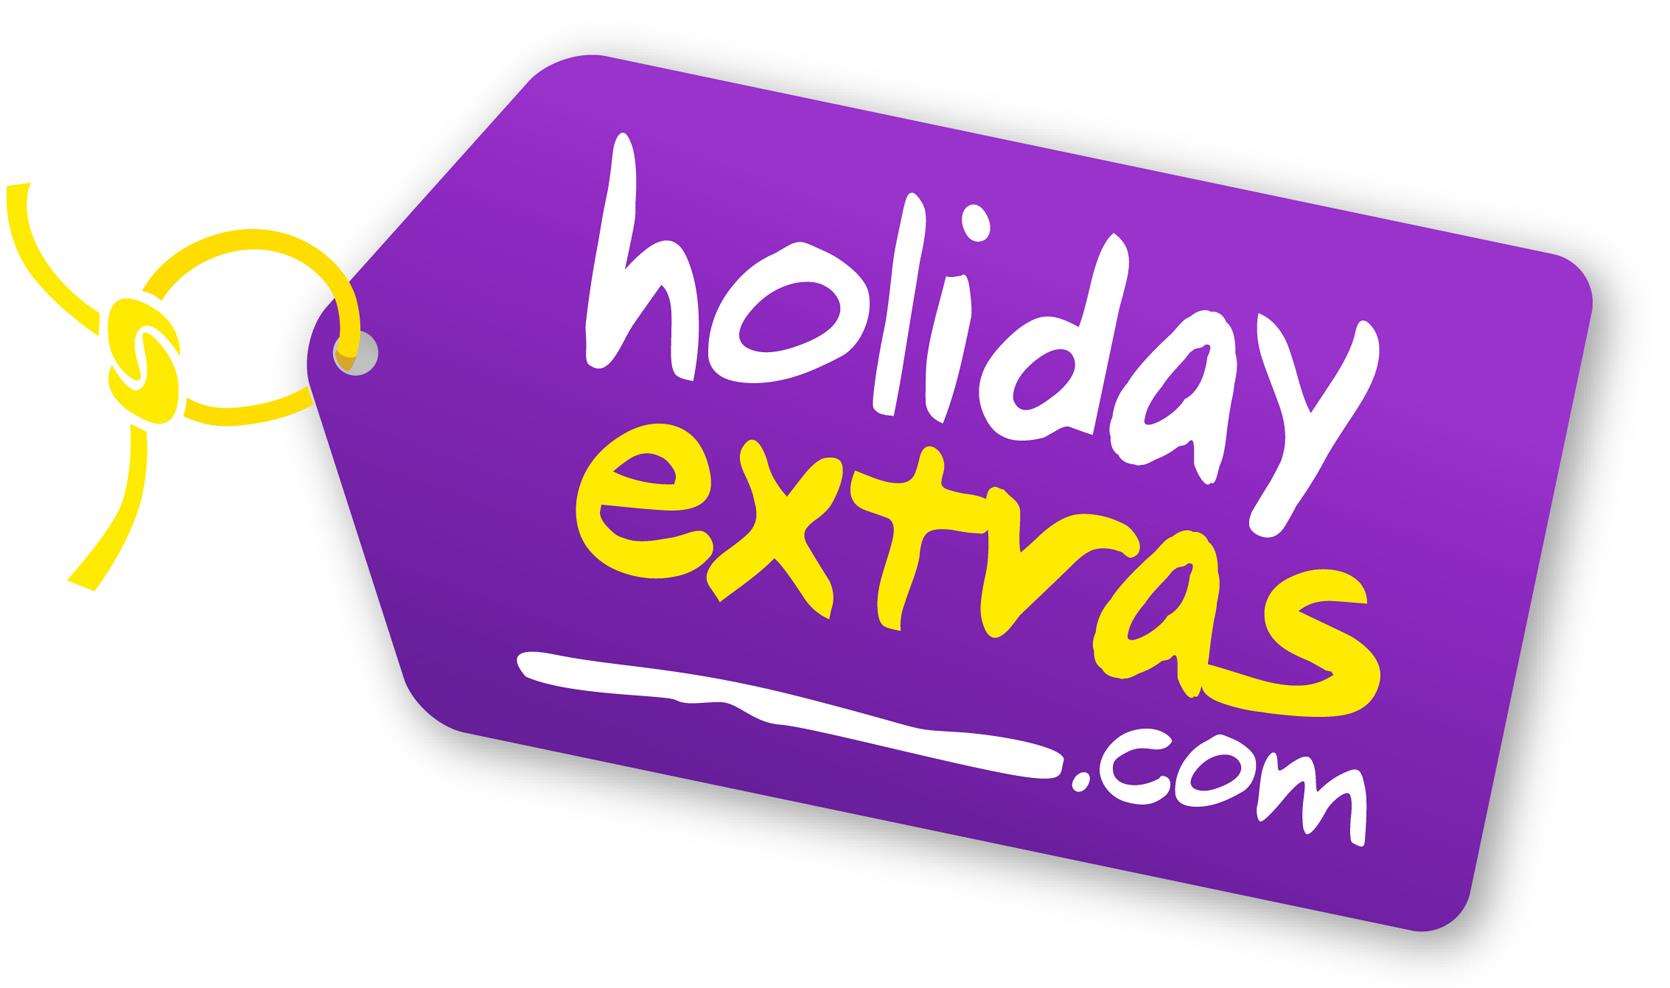 Holiday Extras was subject to a management buy-out in May